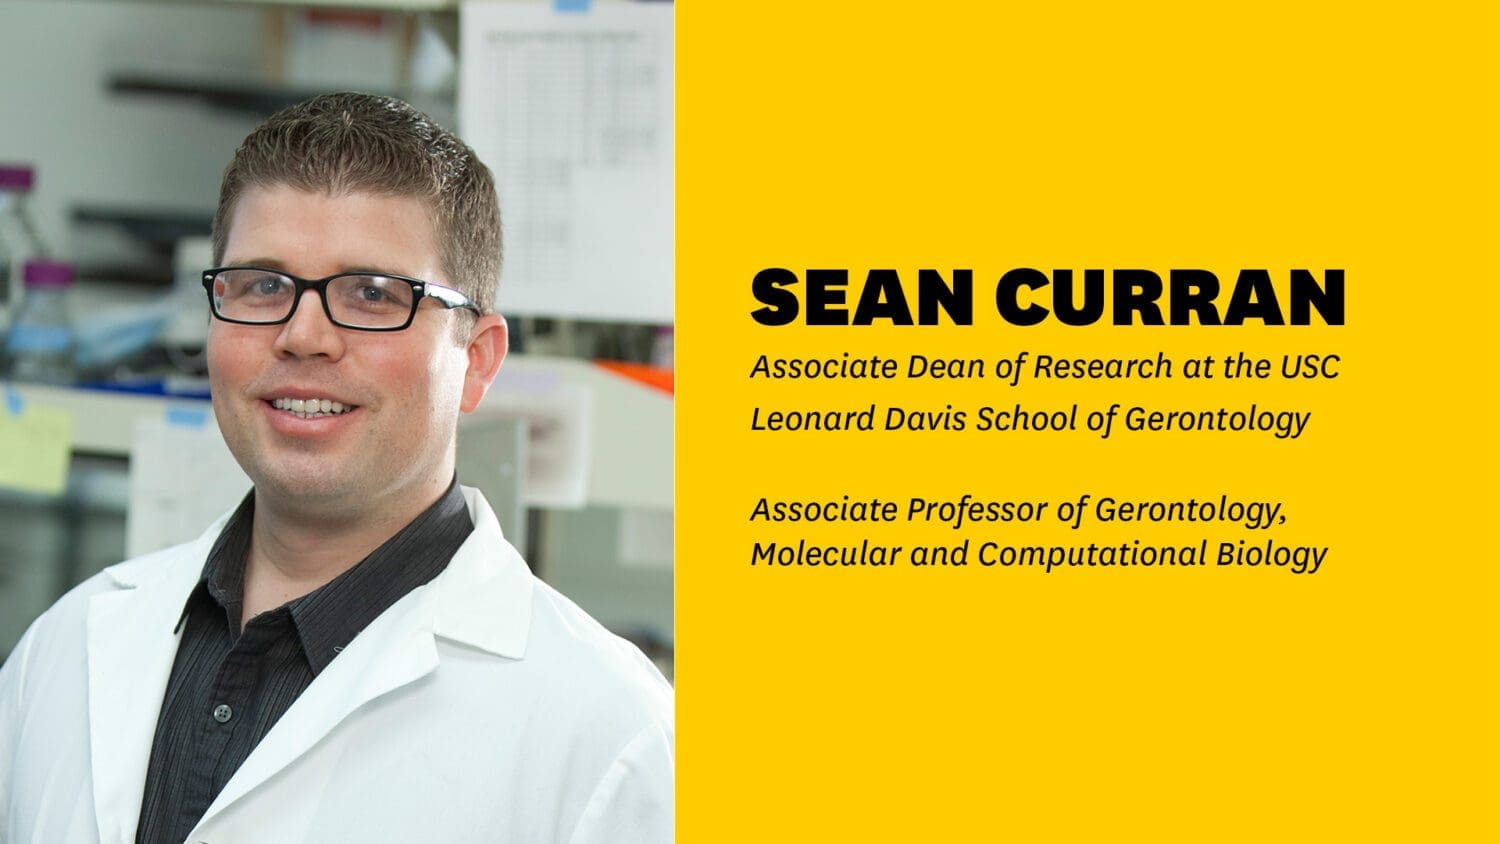 Headshot of Sean Curran with name and faculty titles